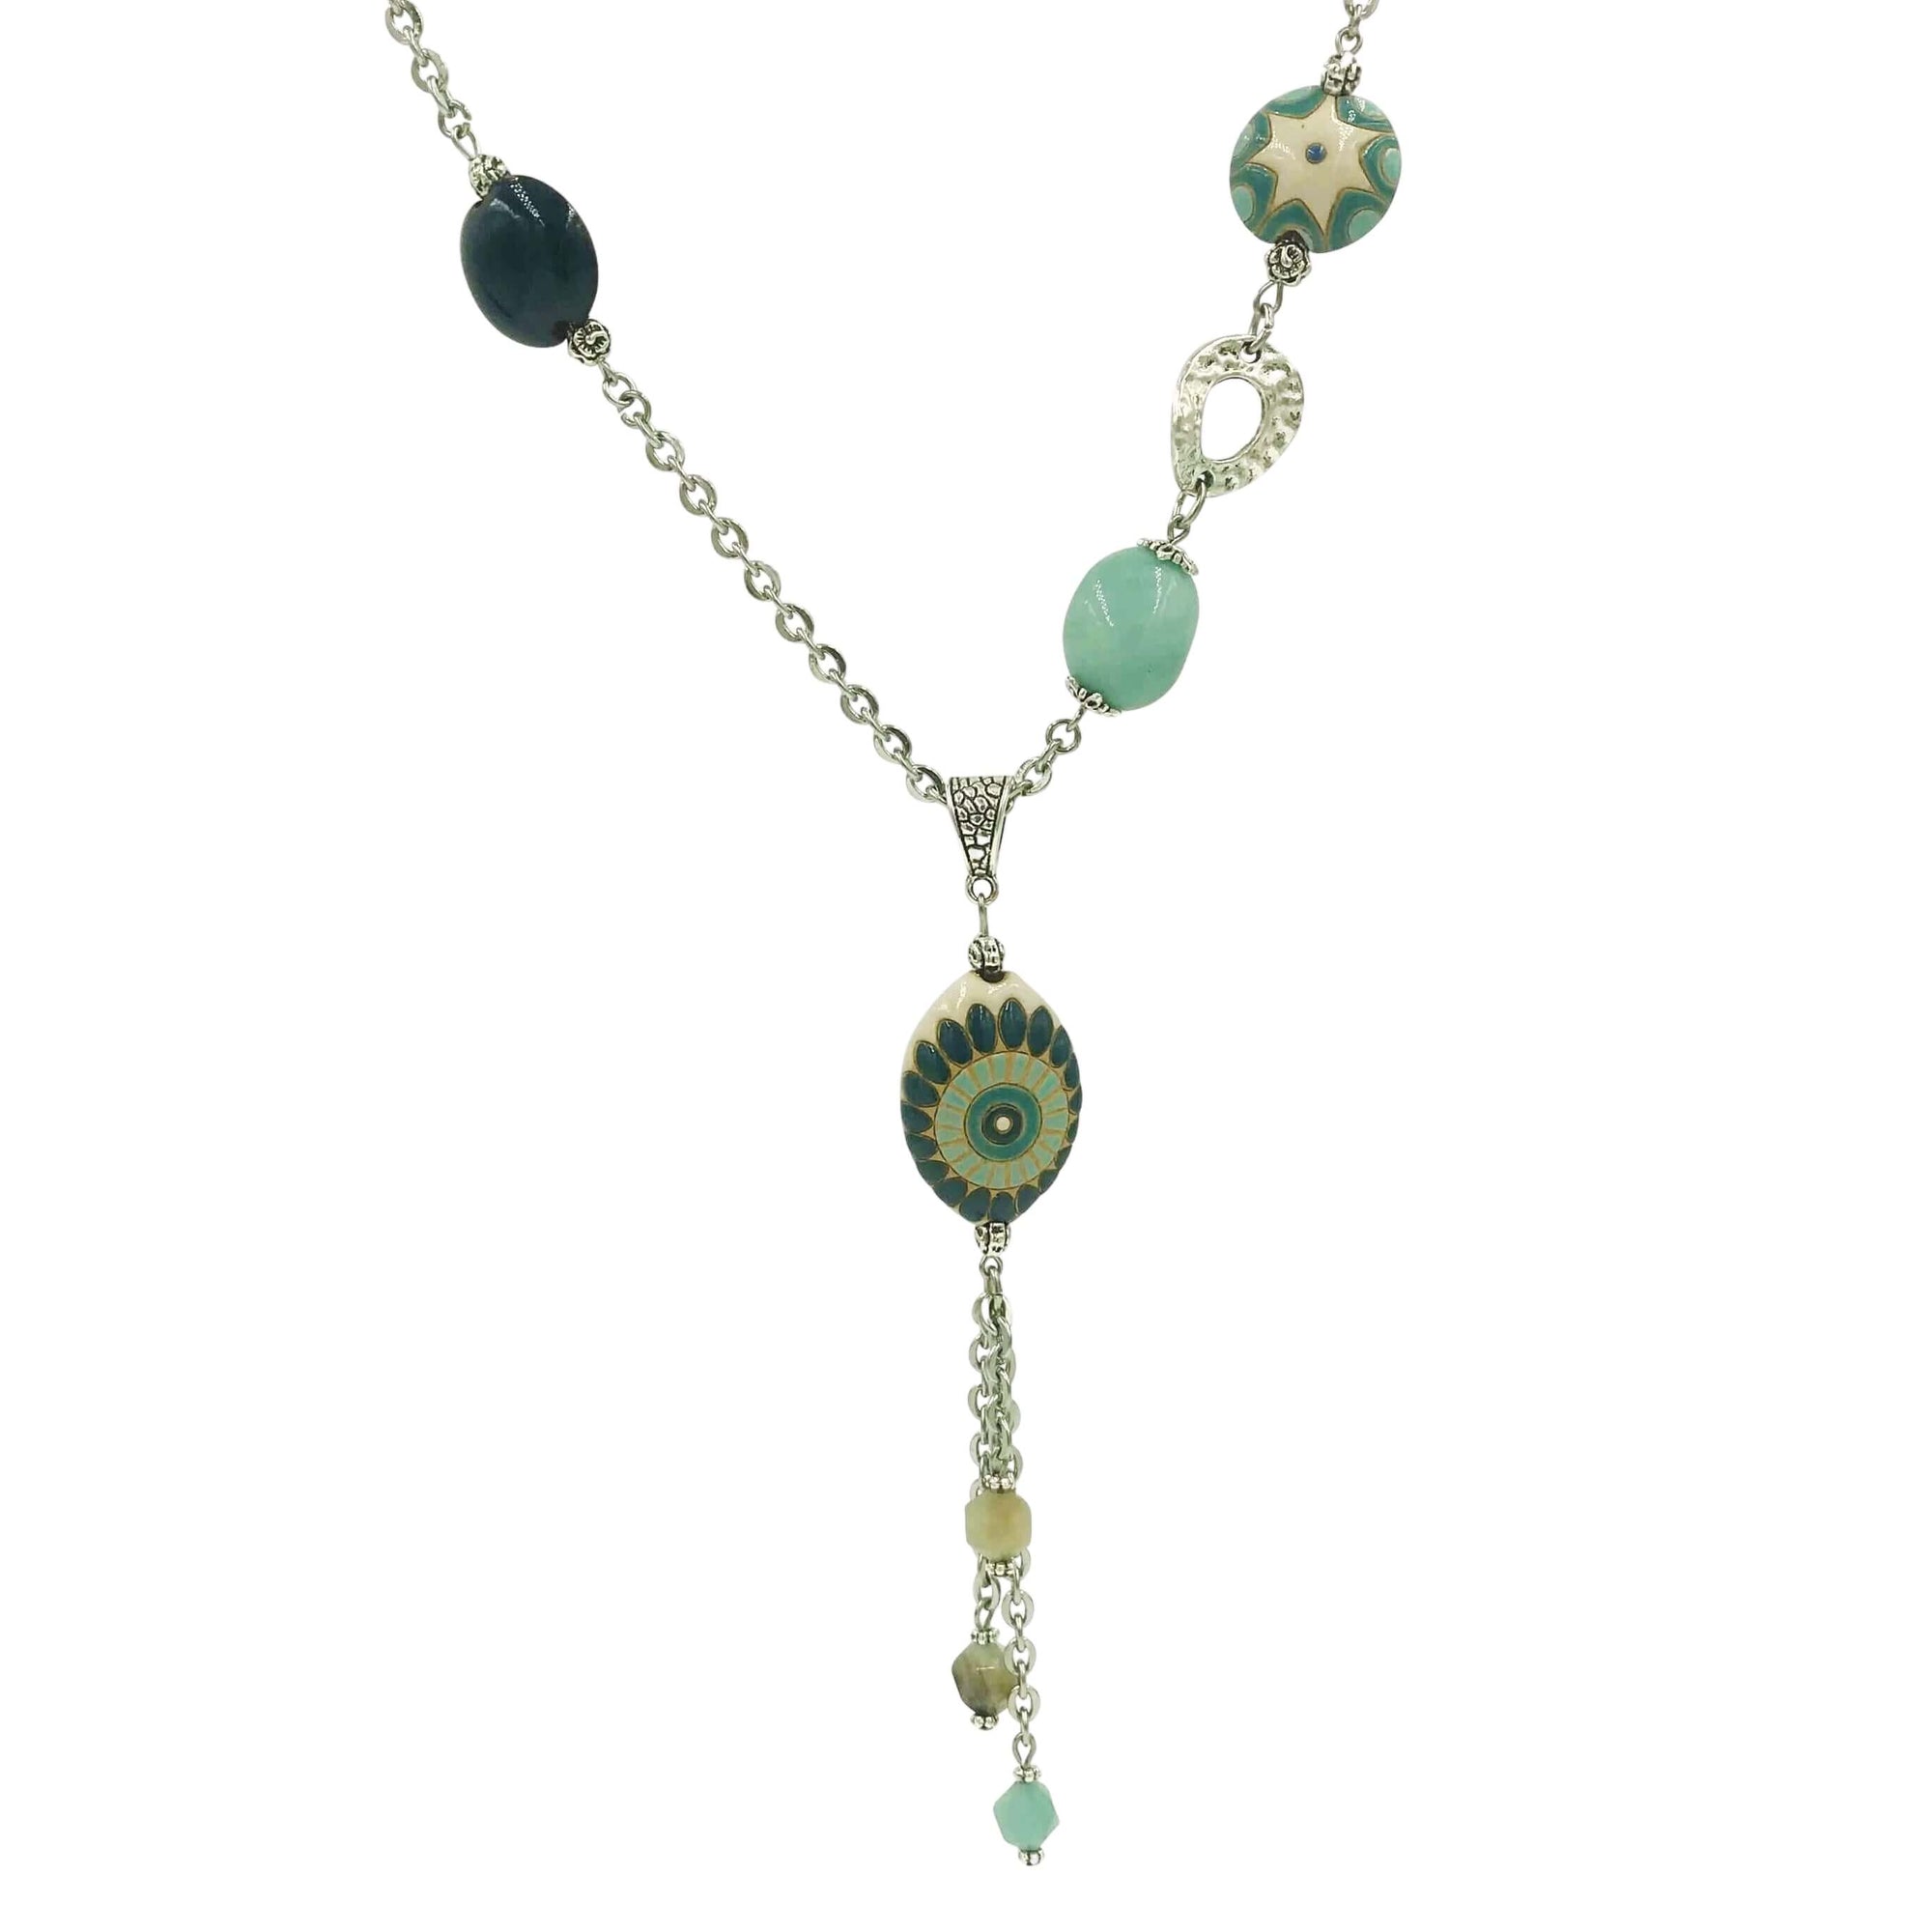 Teal Flower Long Pendant Necklace with Golem Clay Beads-Necklaces- Creative Jewelry by Marcia